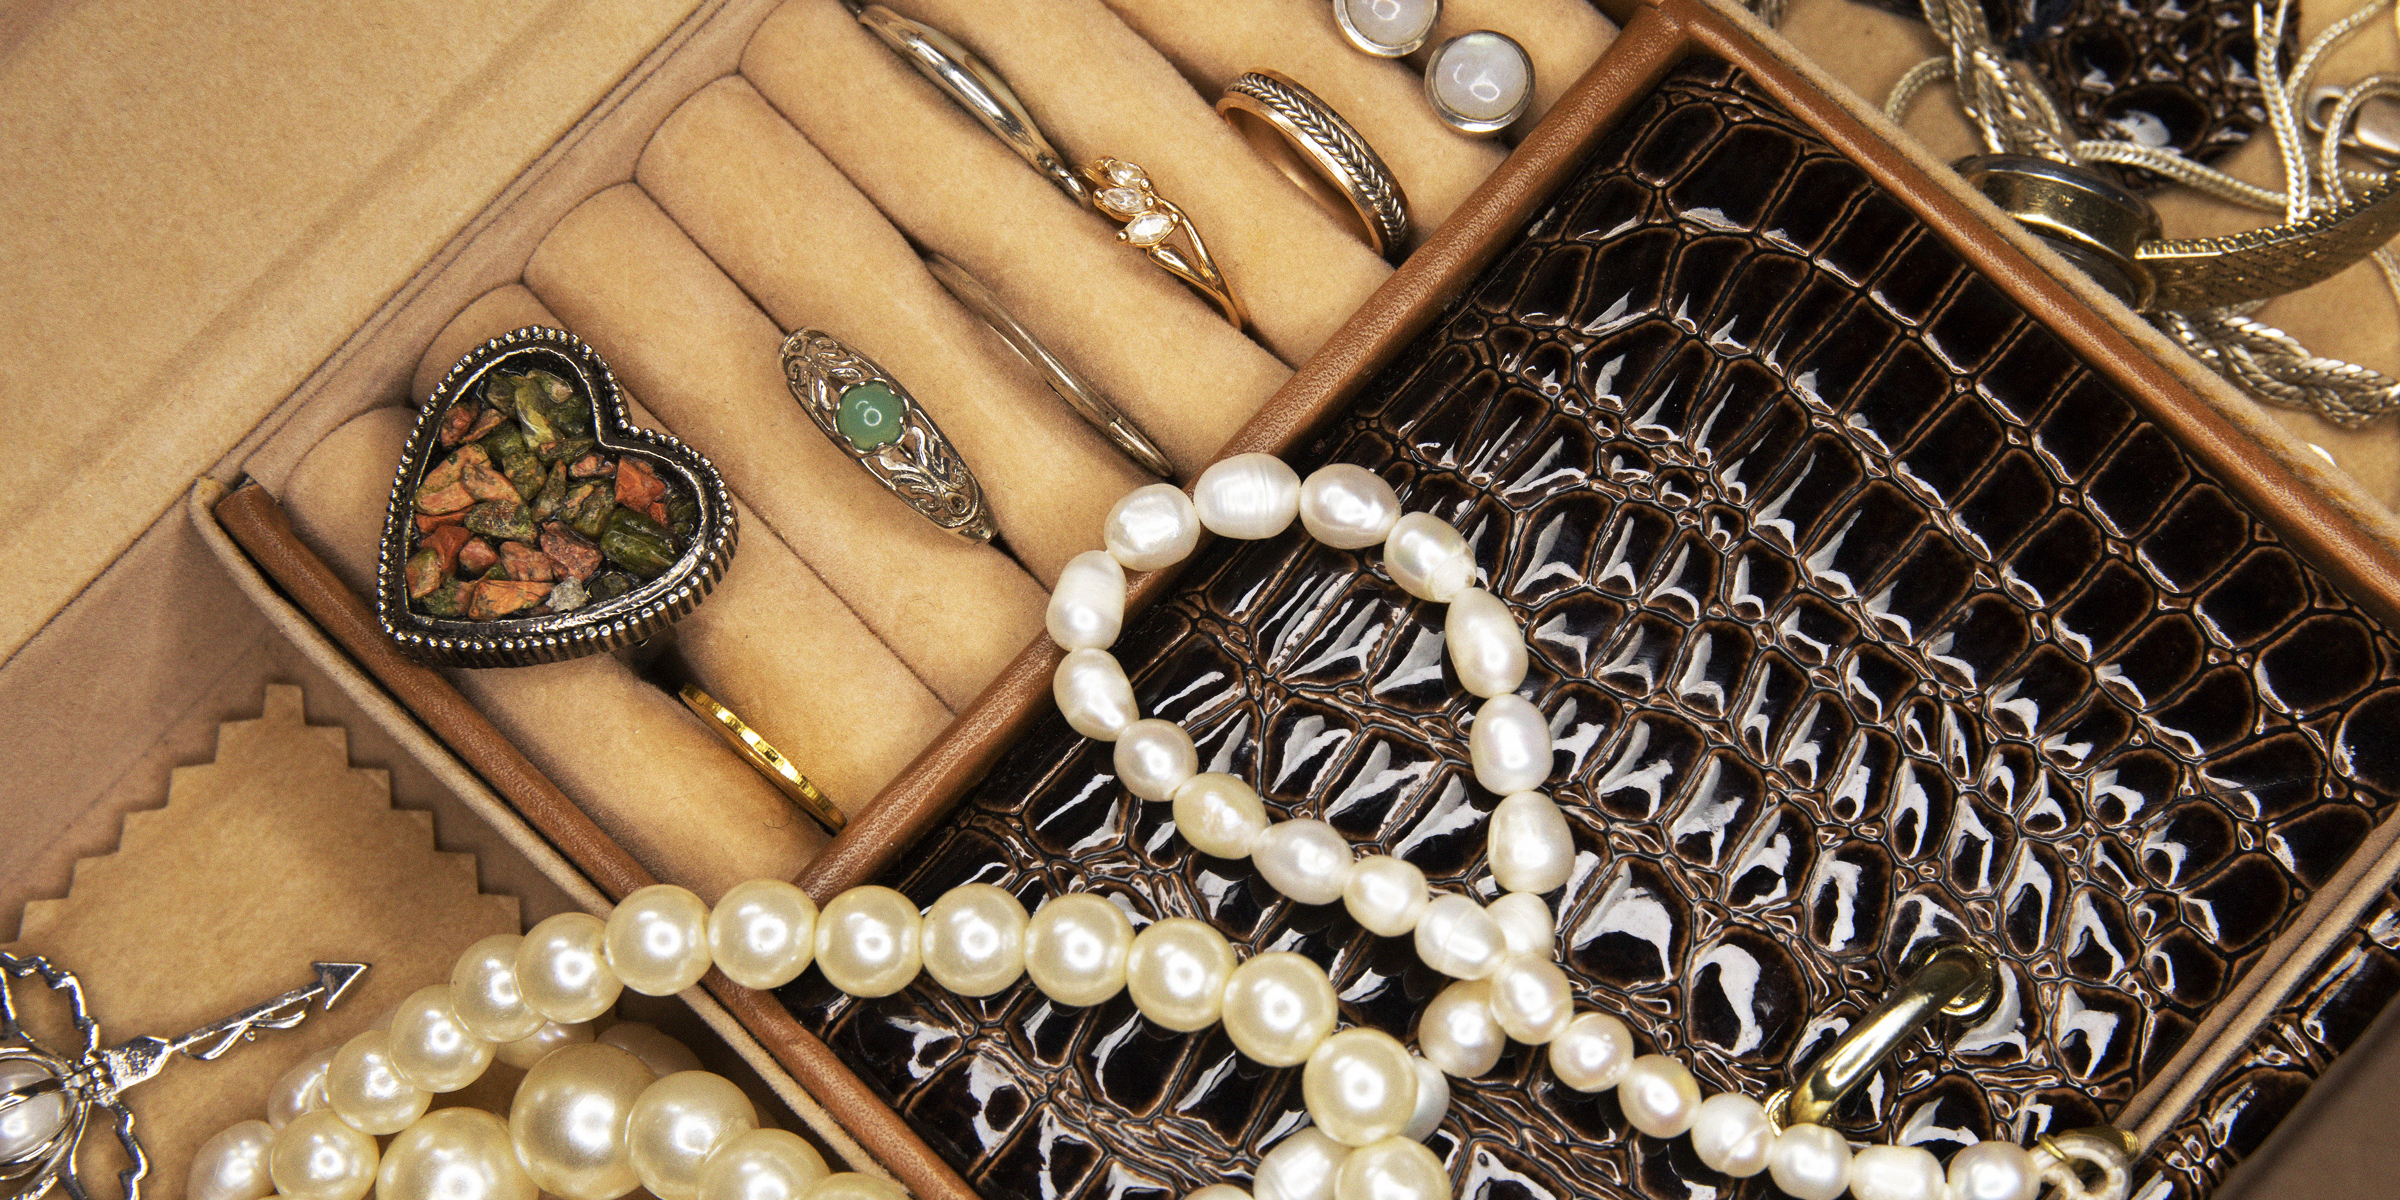 Jewelry box | Source: Getty Images